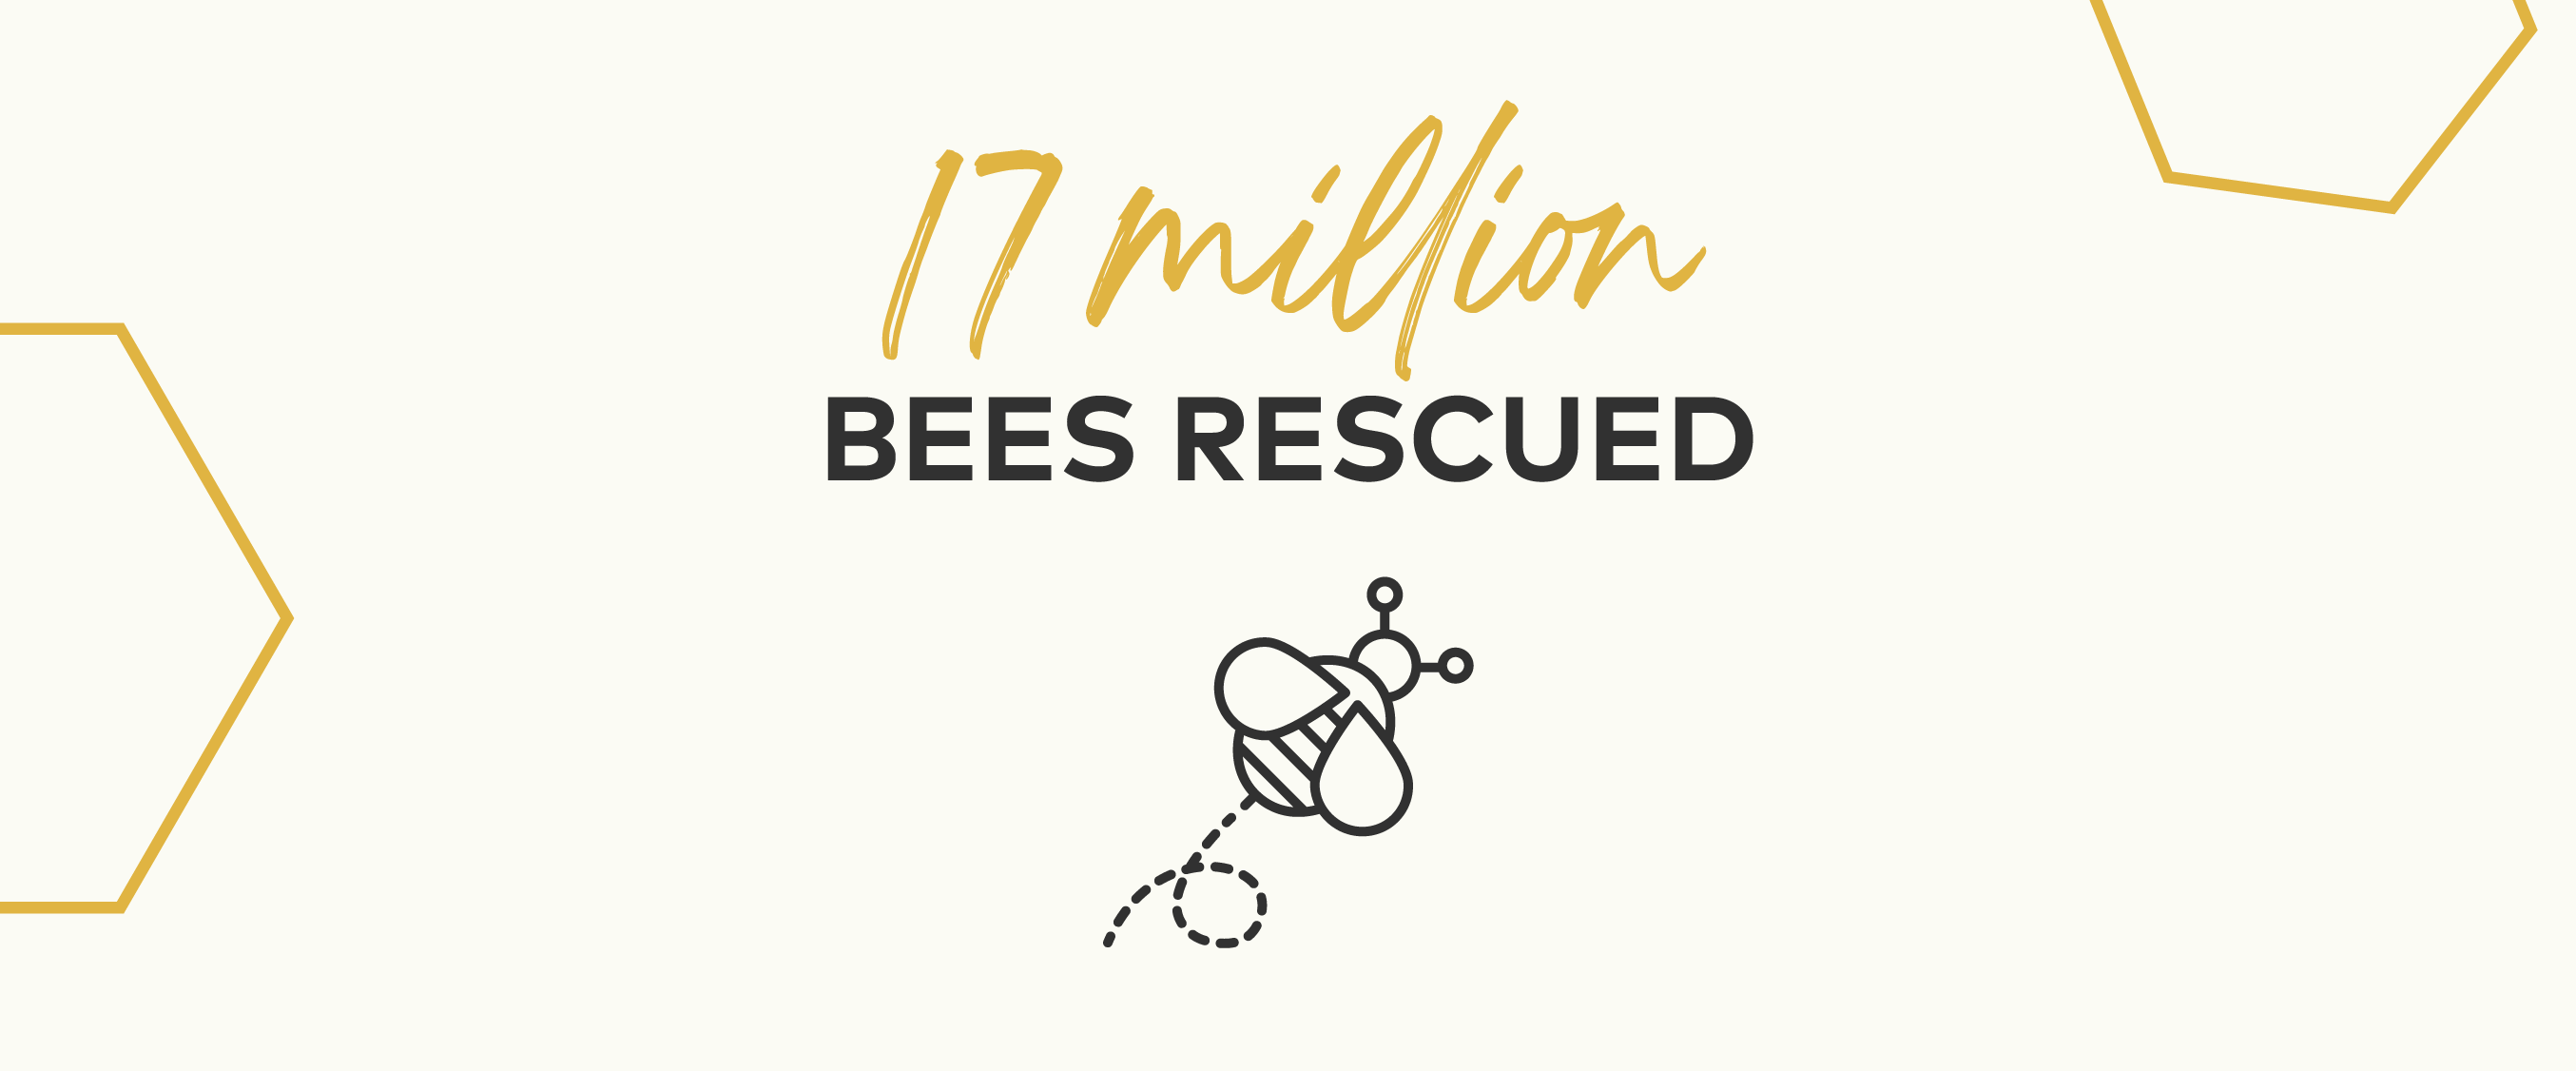 17 Million Bees Rescued